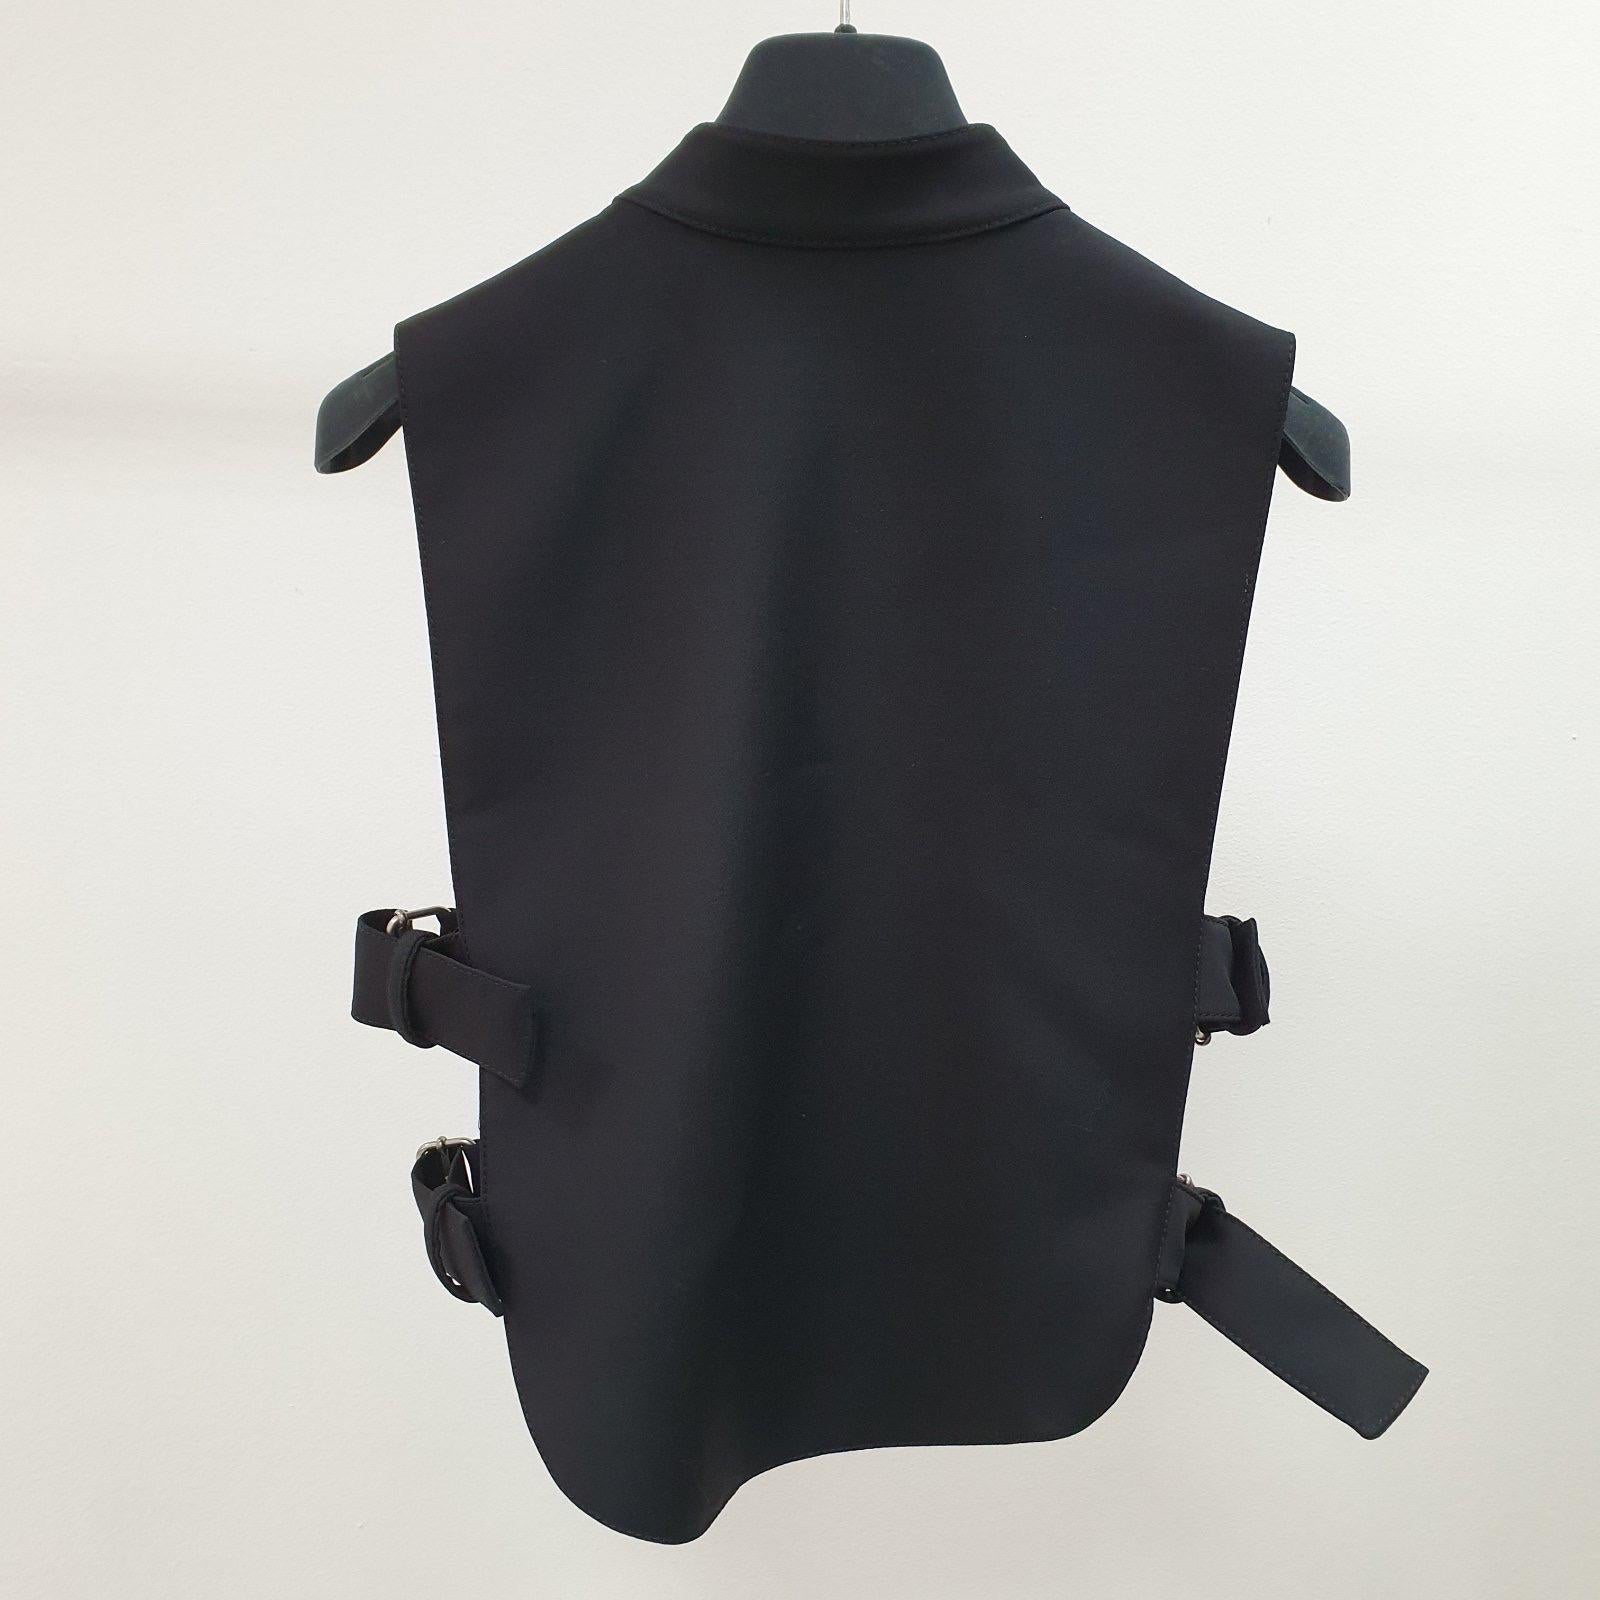 Black Dior Vest from the catwalk.
Can be worn nacked or with a shirt.
Sz.M
Condition is excellent.